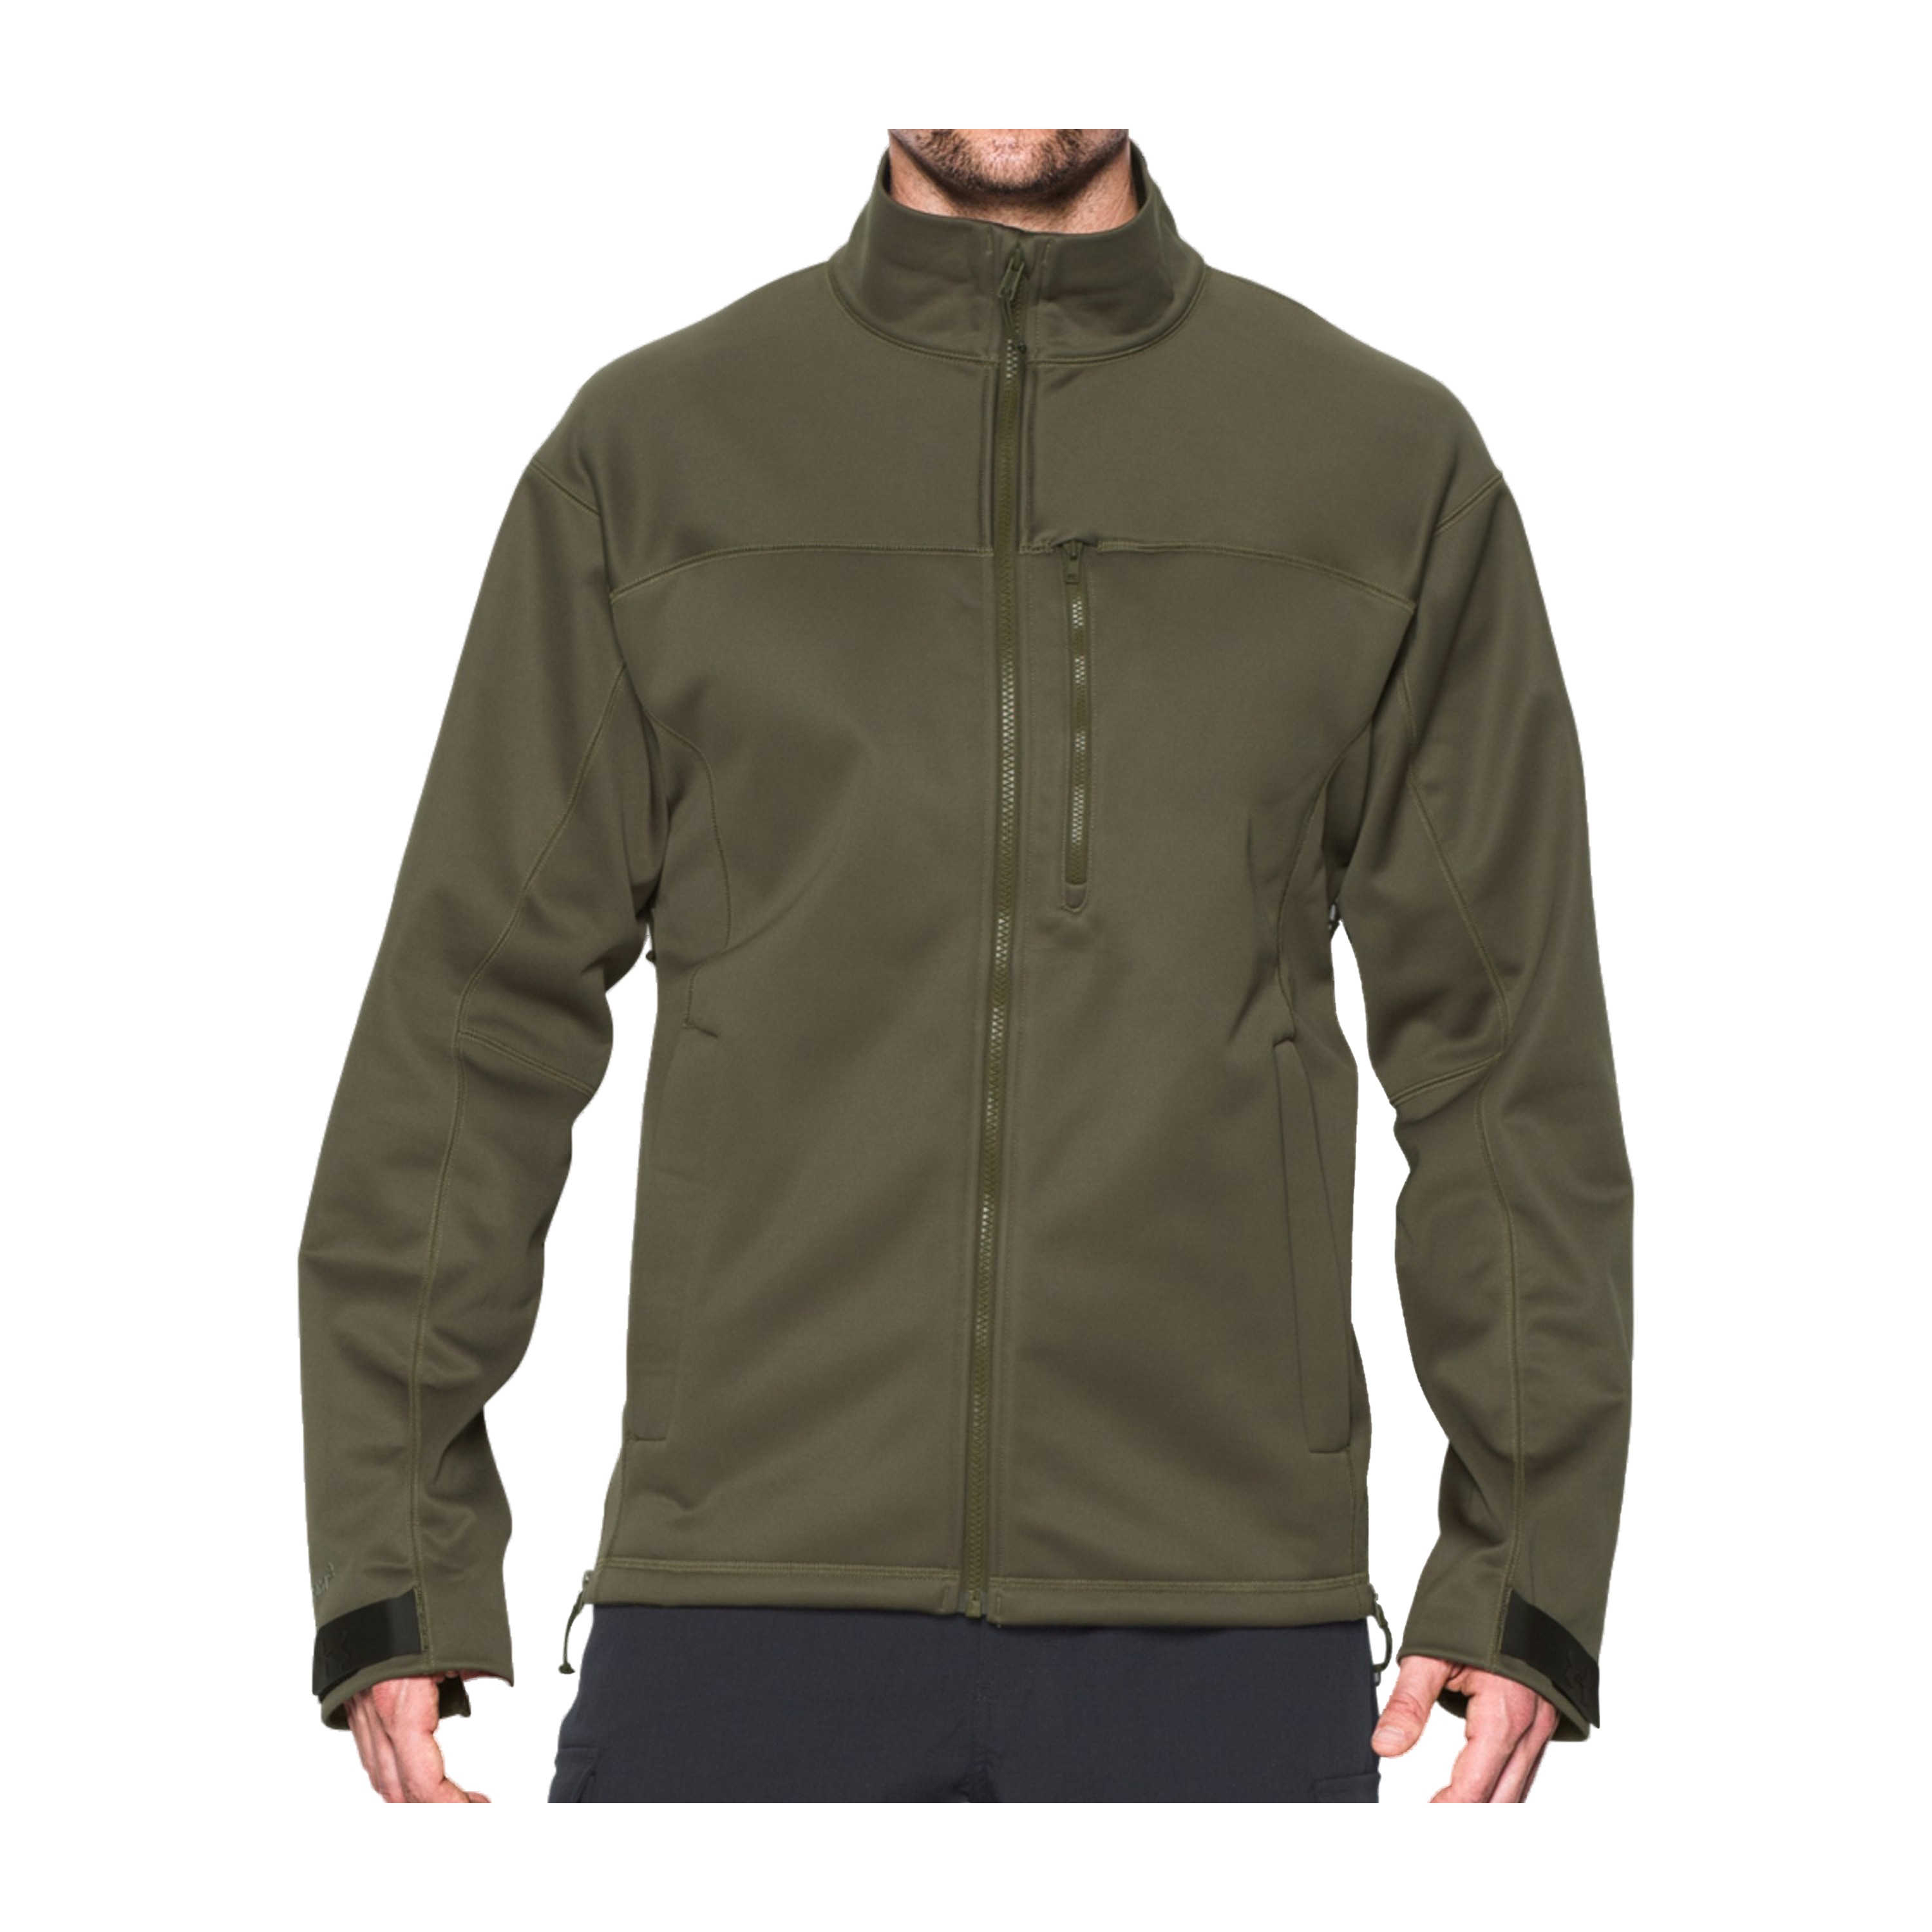 Under Armour Tactical Jacket Duty olive